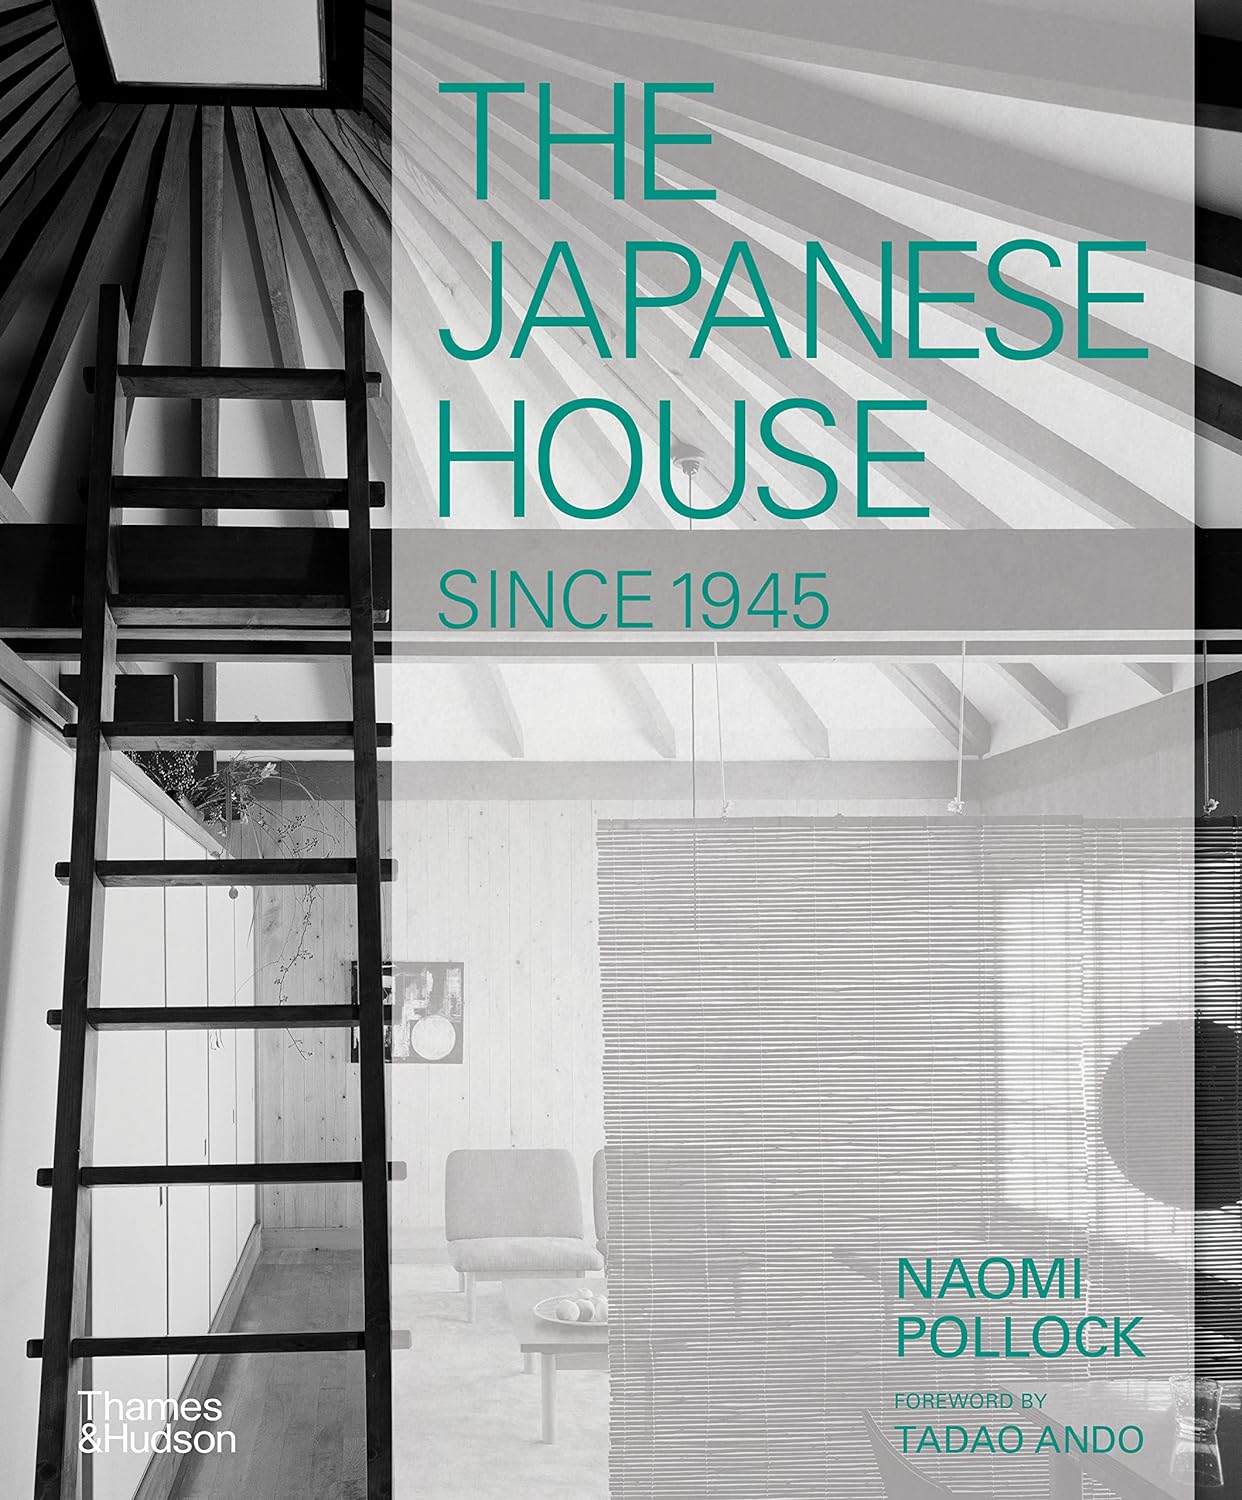 The Japanese House - Since 1945